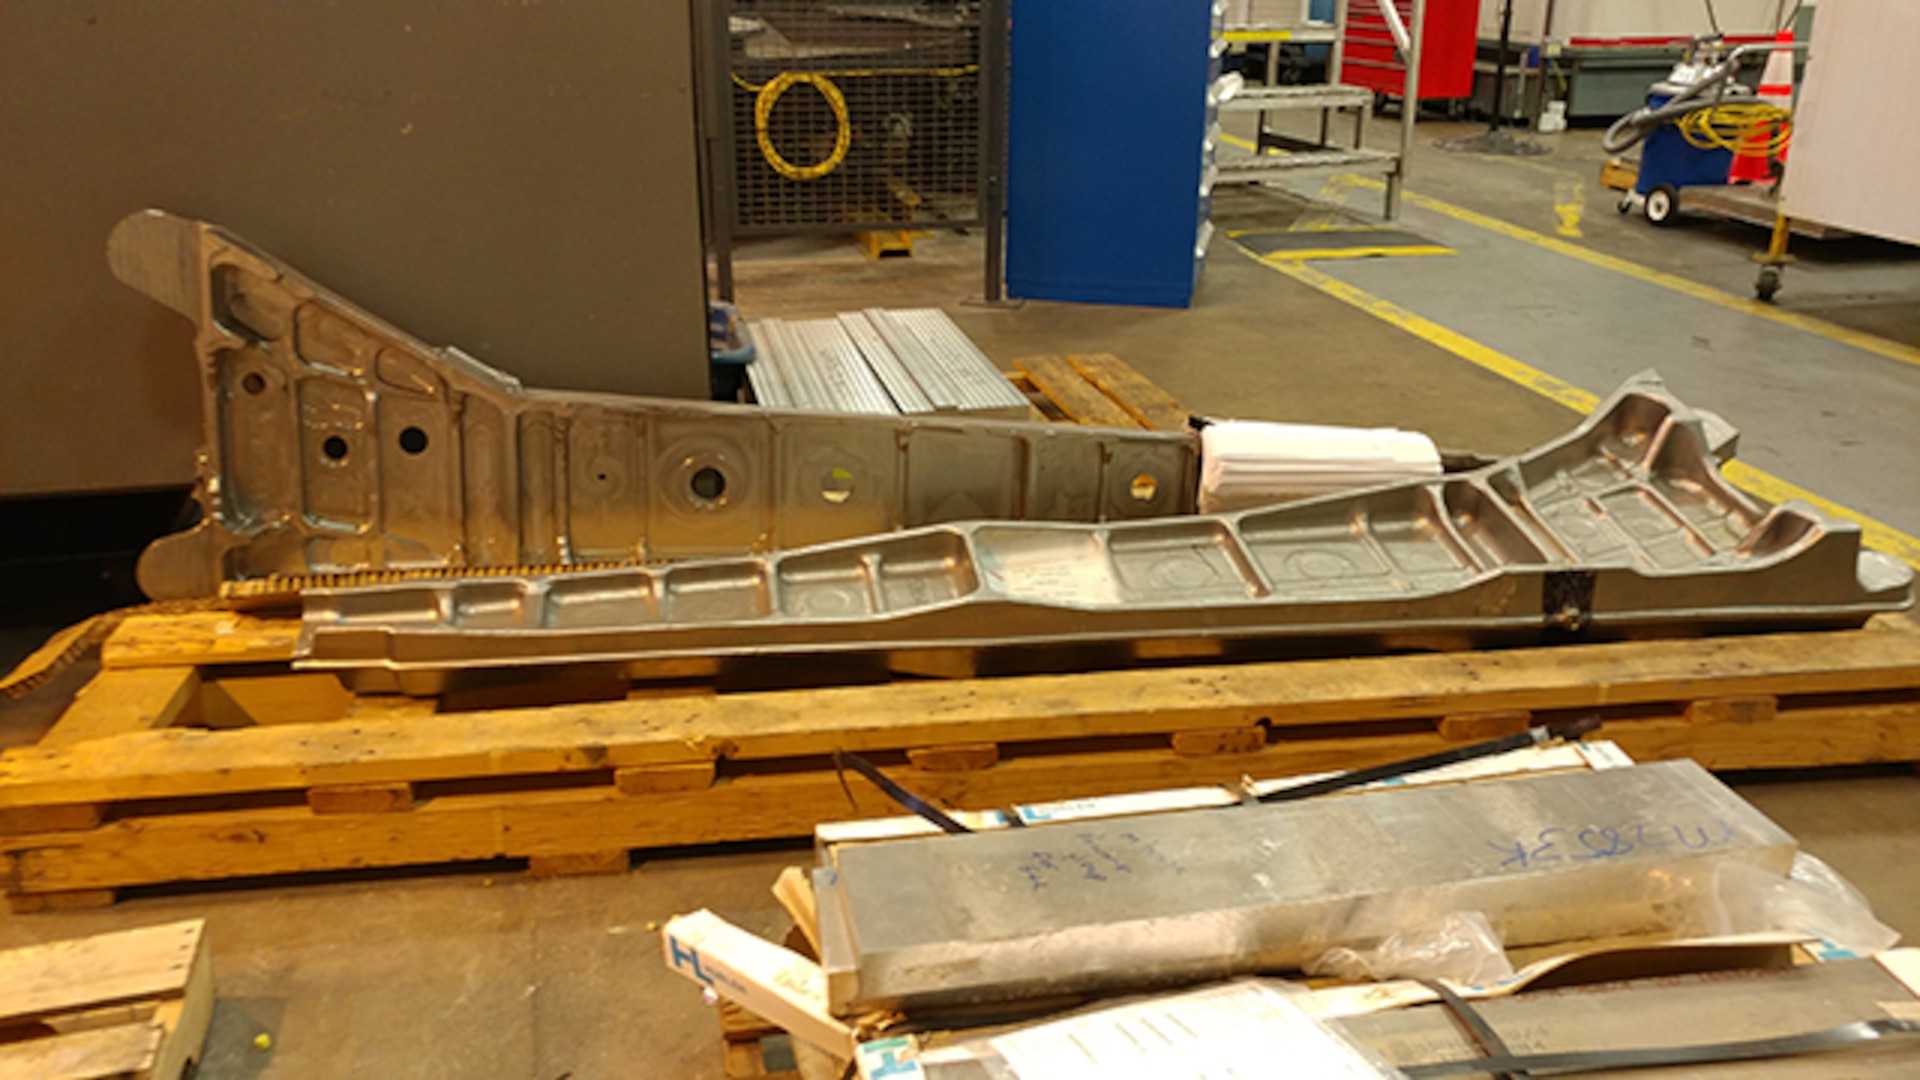 Defense Logistics Agency Aviation and the Air Force partnered on an organic manufacturing contract to provide needed parts for the F-15 aircraft.  Pictured here is a a forged billet that will undergo additional milling to turn it into a wing spar, a critical structural components within the aircraft’s wing.